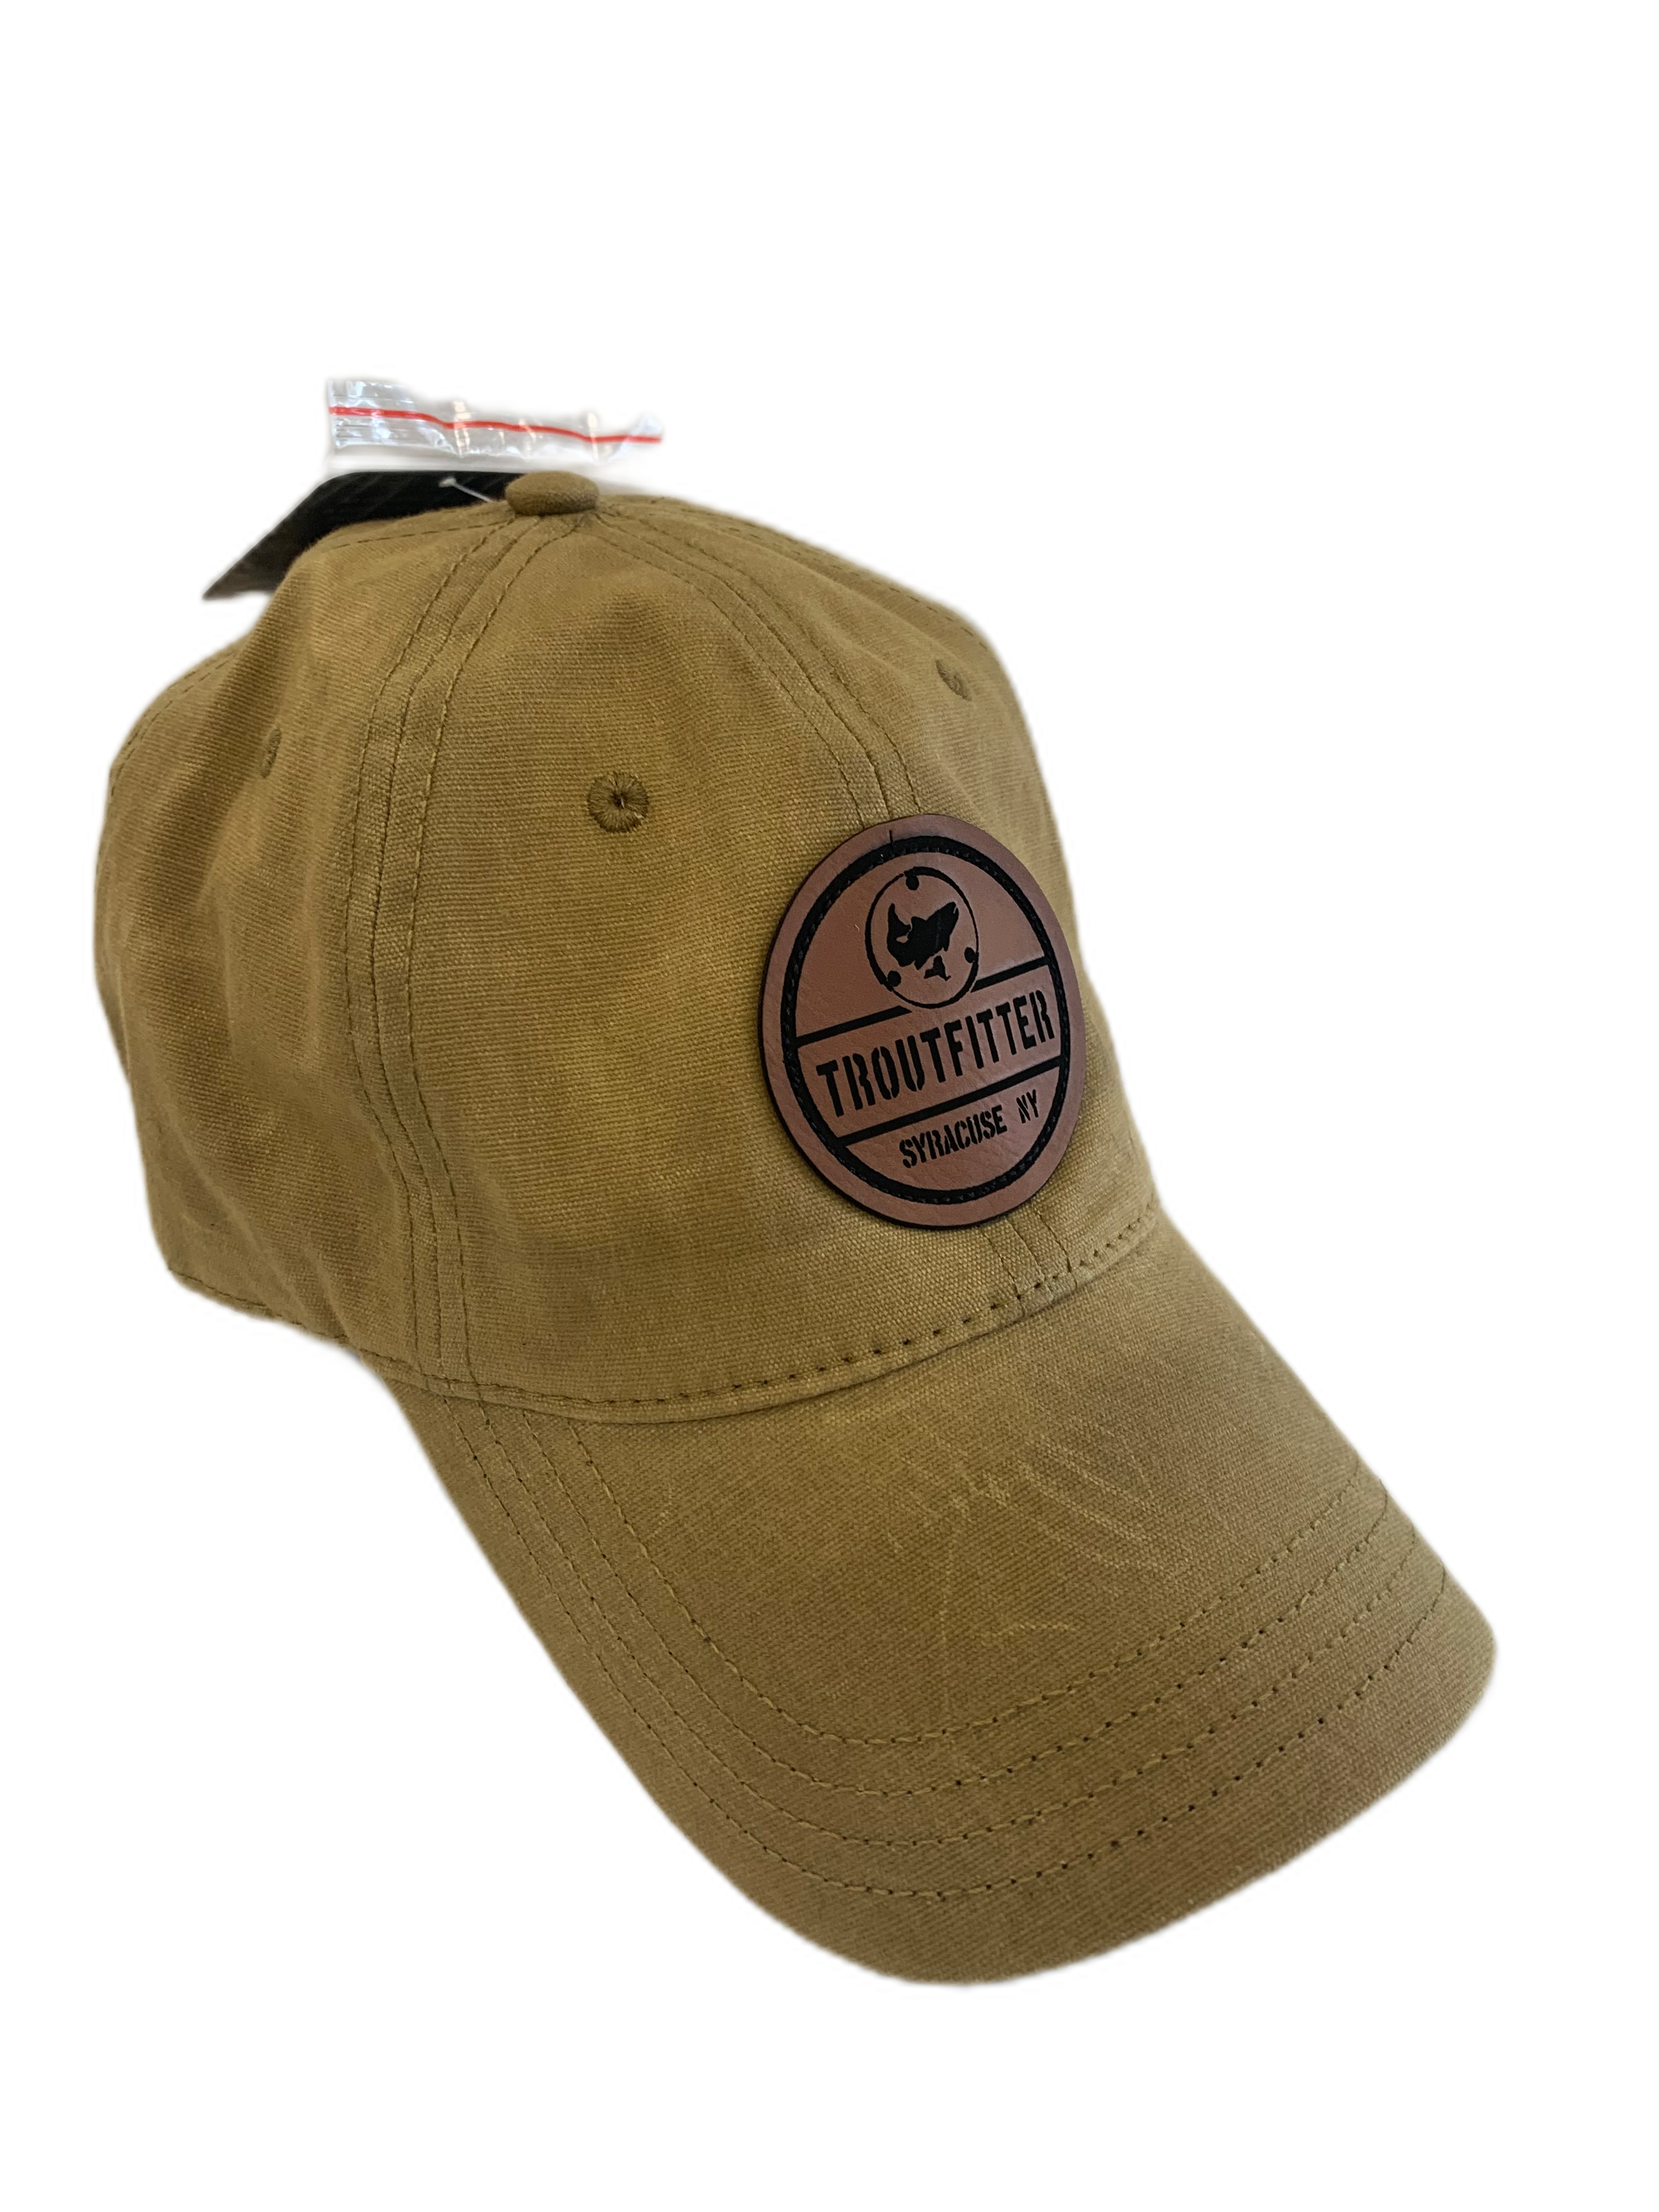 Troutfitter Waxed Canvas Cap